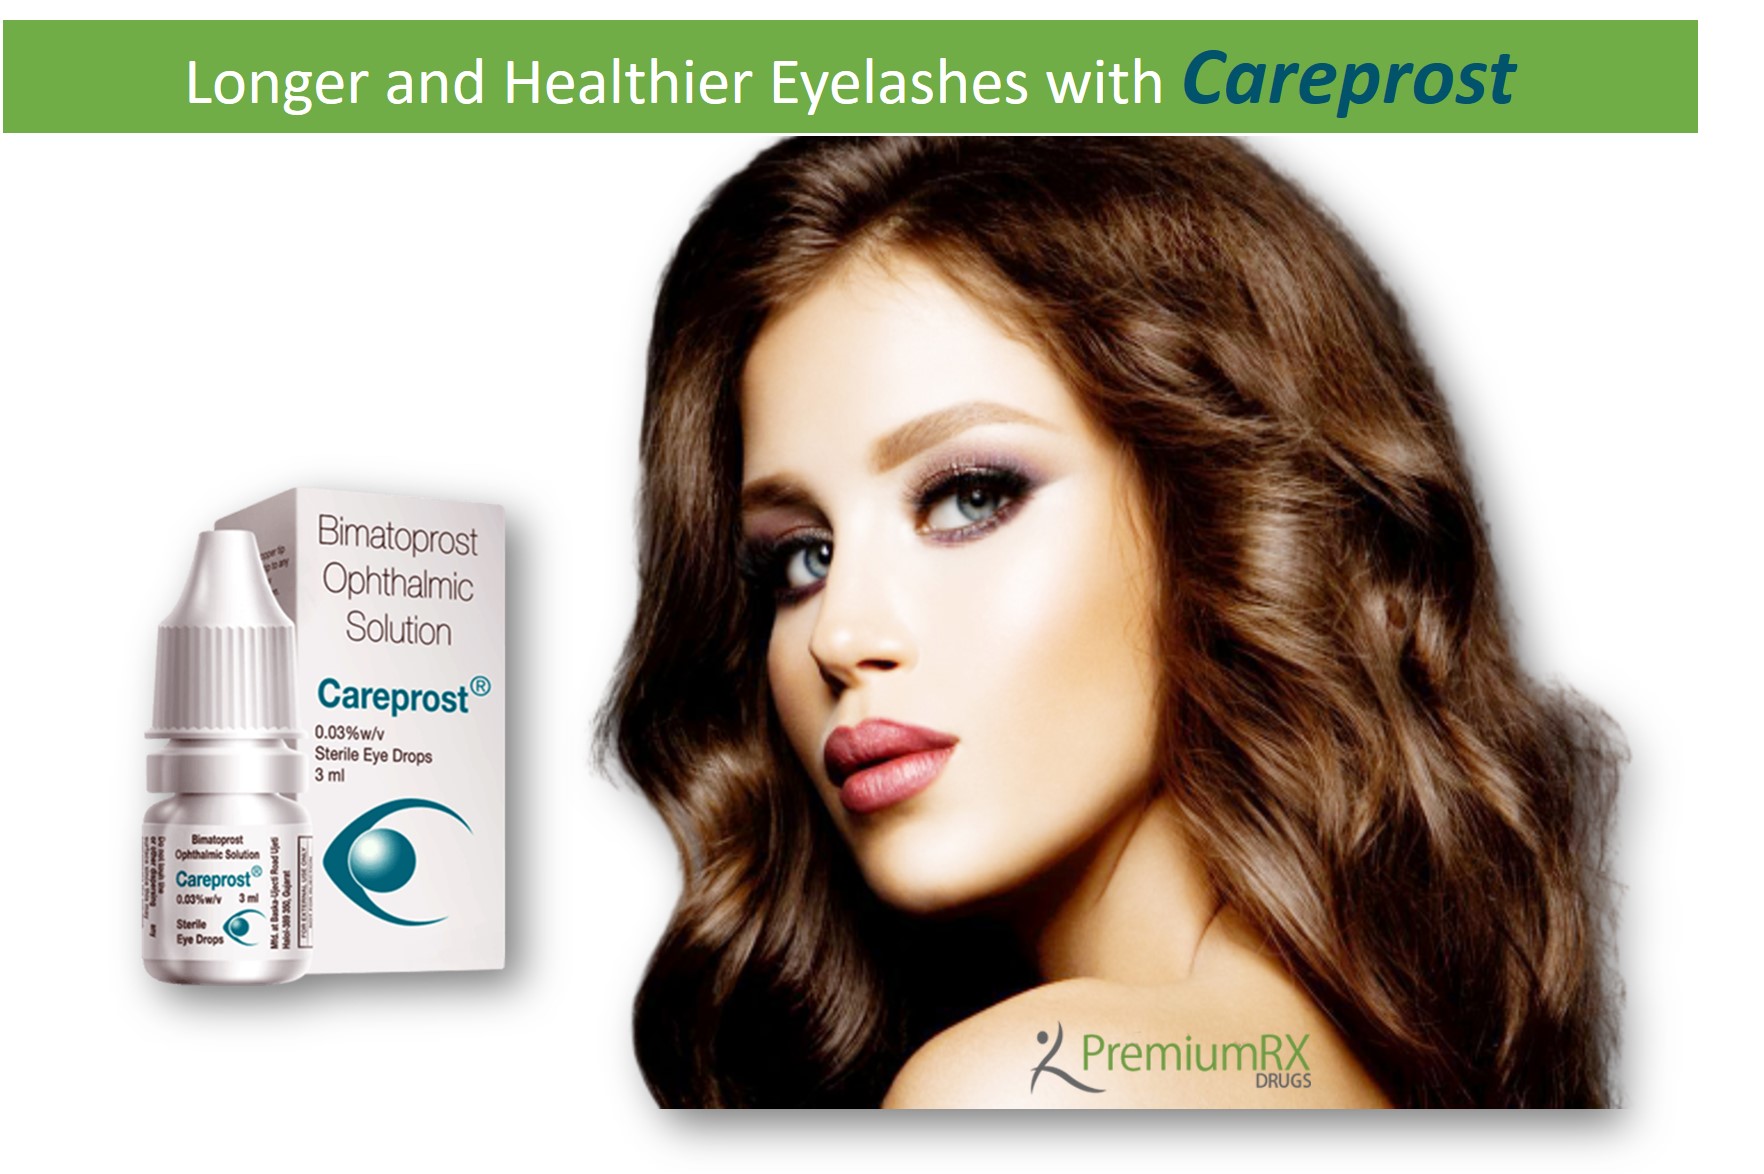 How Careprost Change Your Eye Look